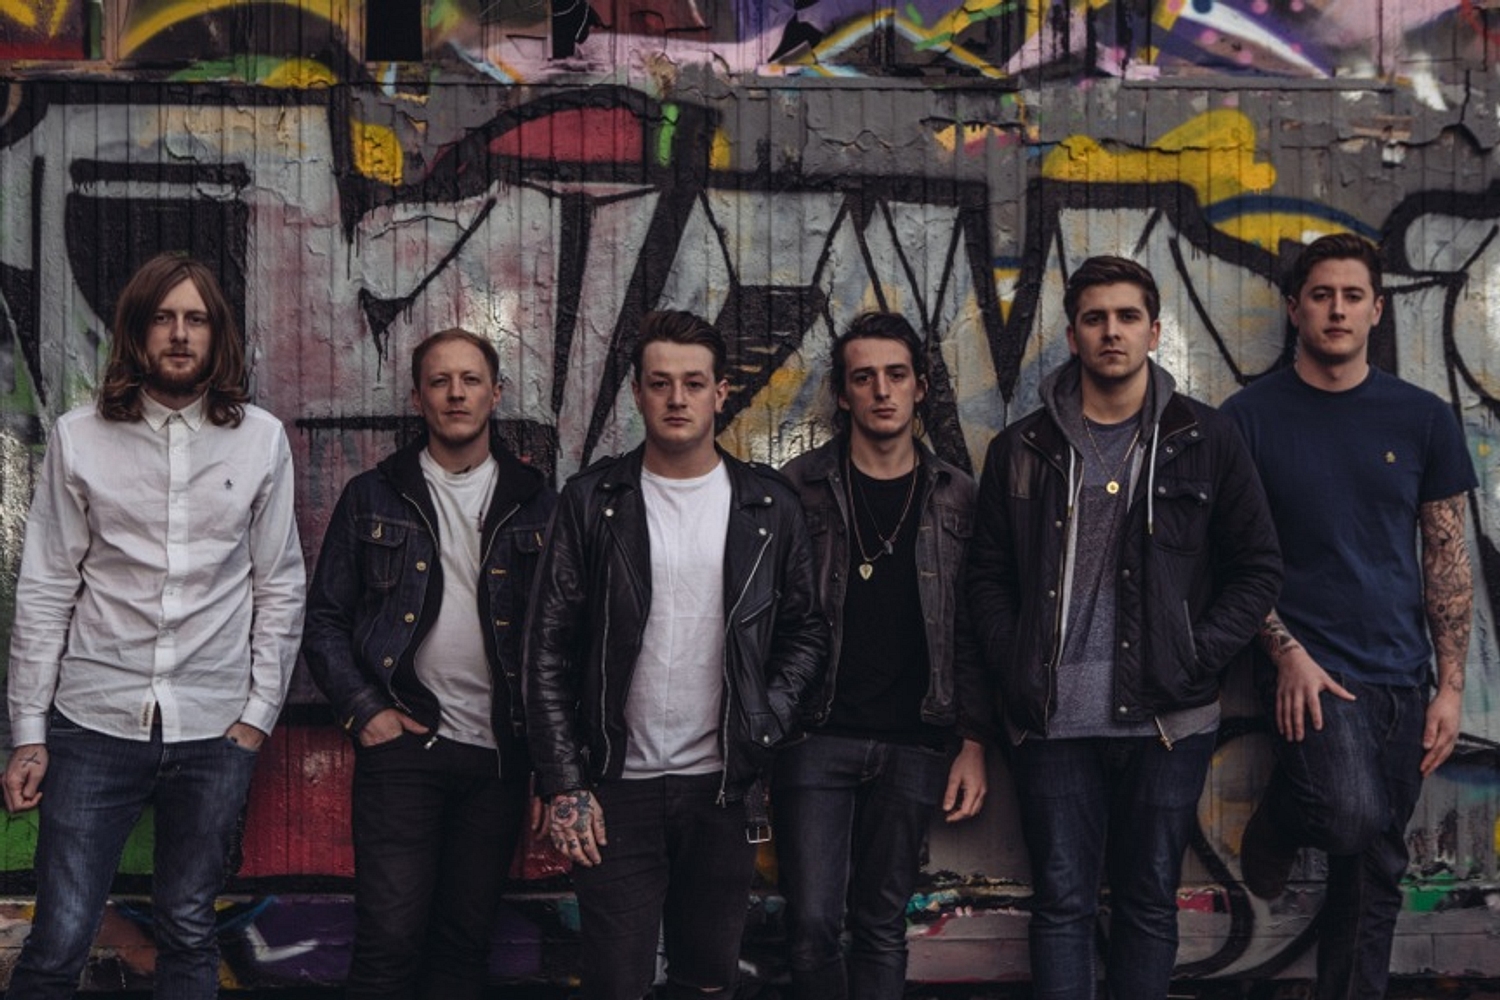 Deaf Havana have posted a new song clip